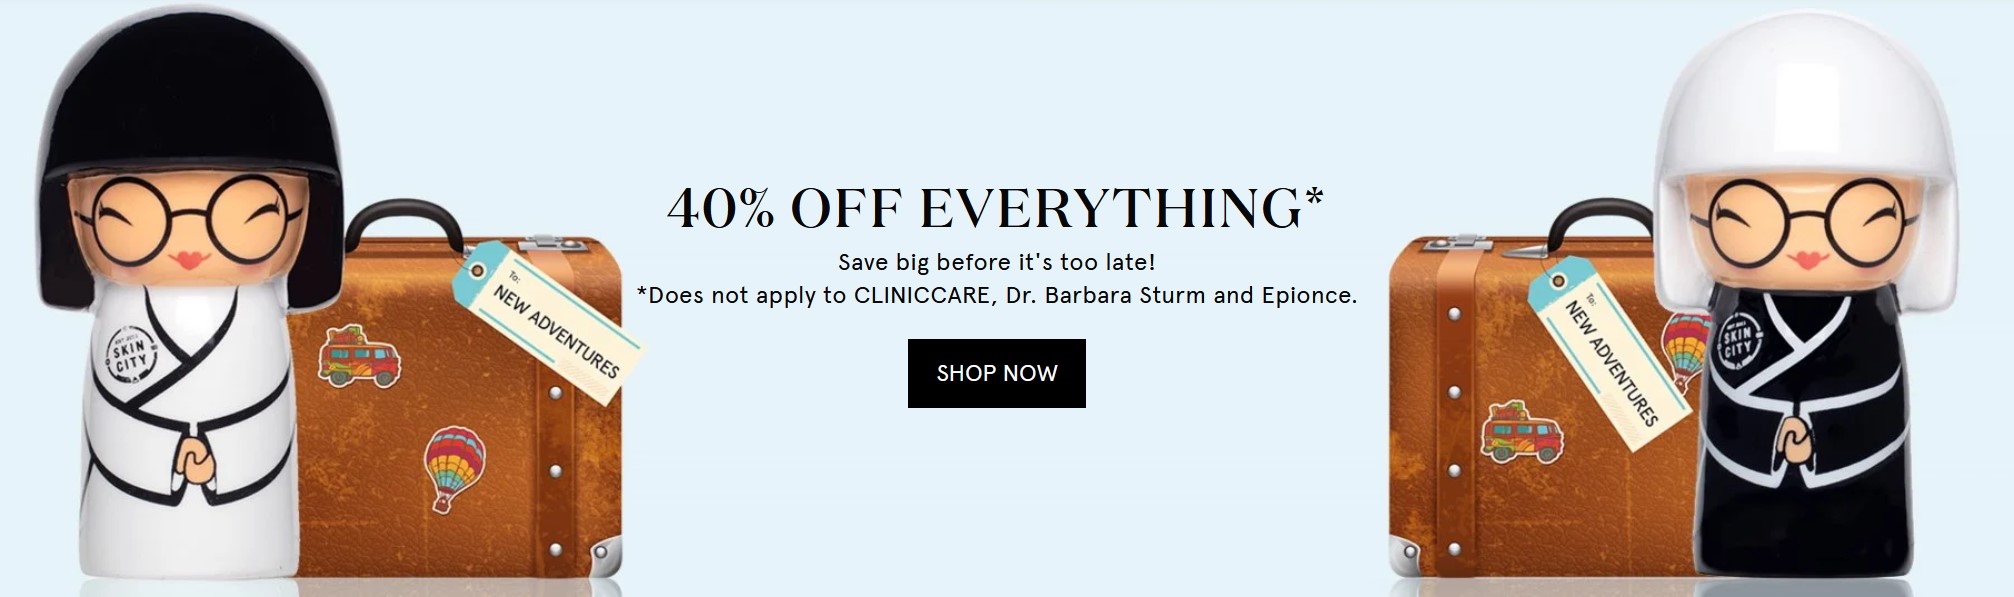 40% off skin care and beauty at Skin City